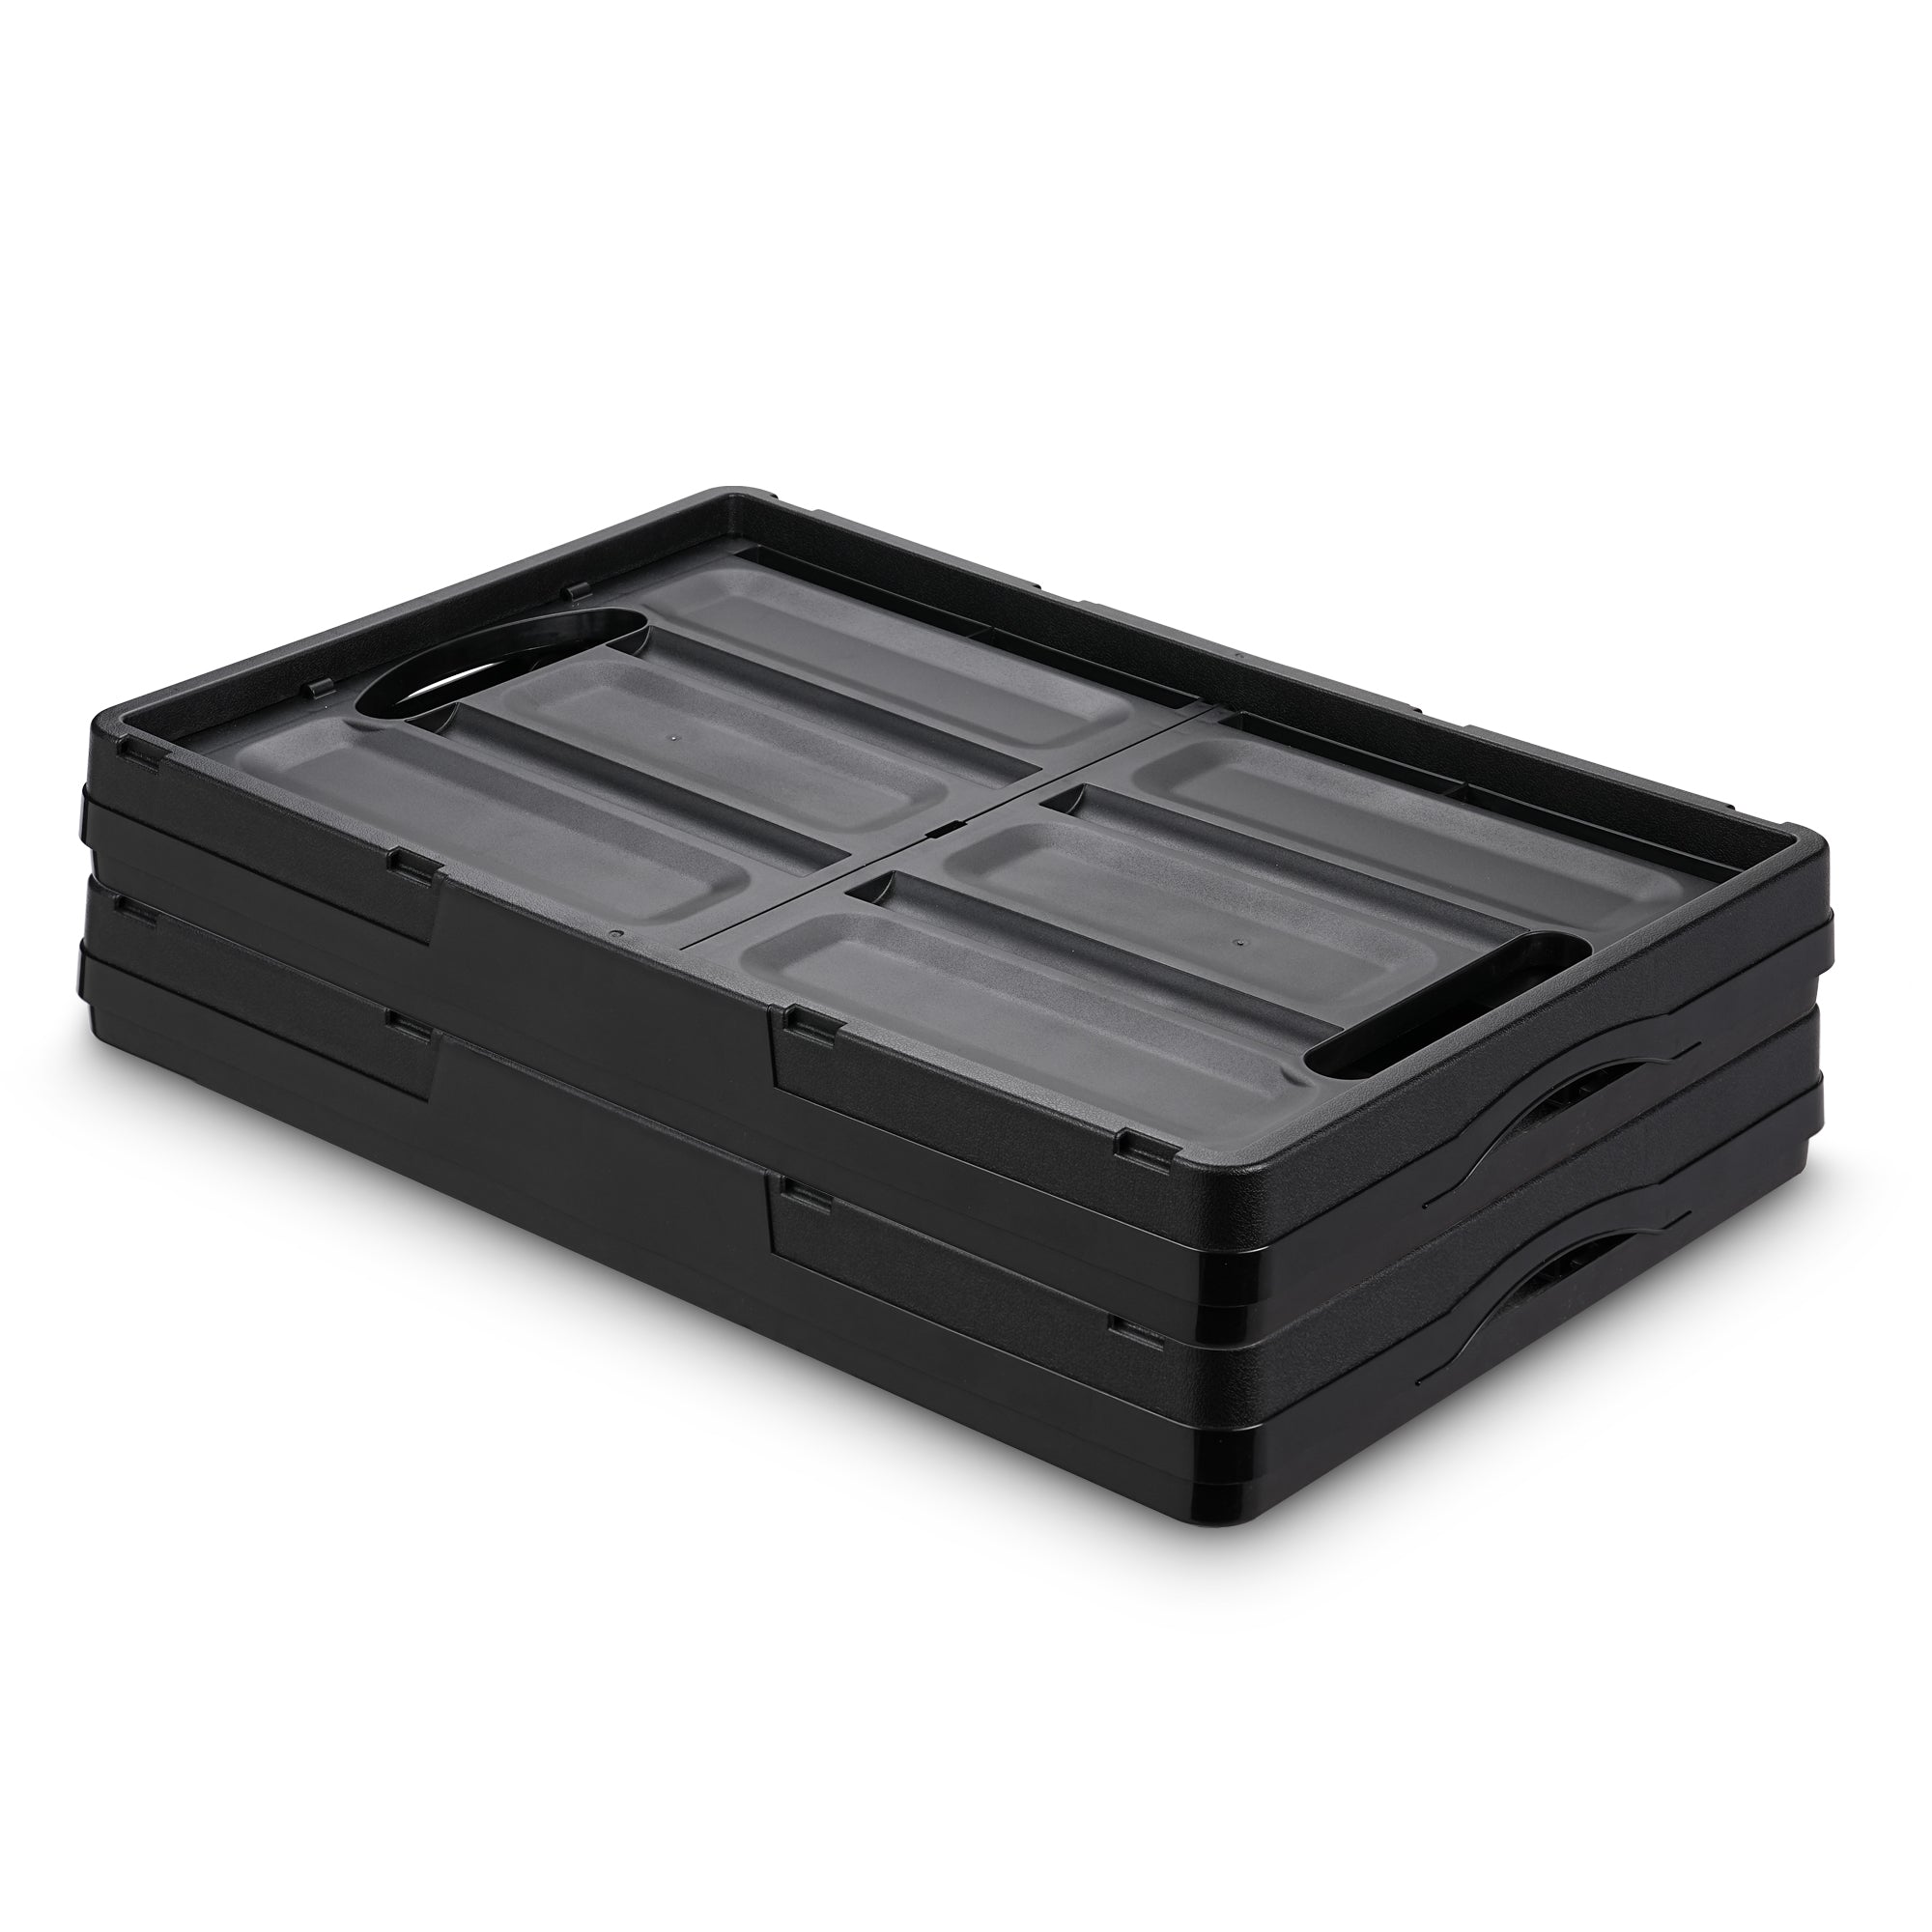 EHHLY 46L Collapsible Storage Bins(No Lid), Foldable Plastic Milk Crates for Storage, 2 Pack, Black